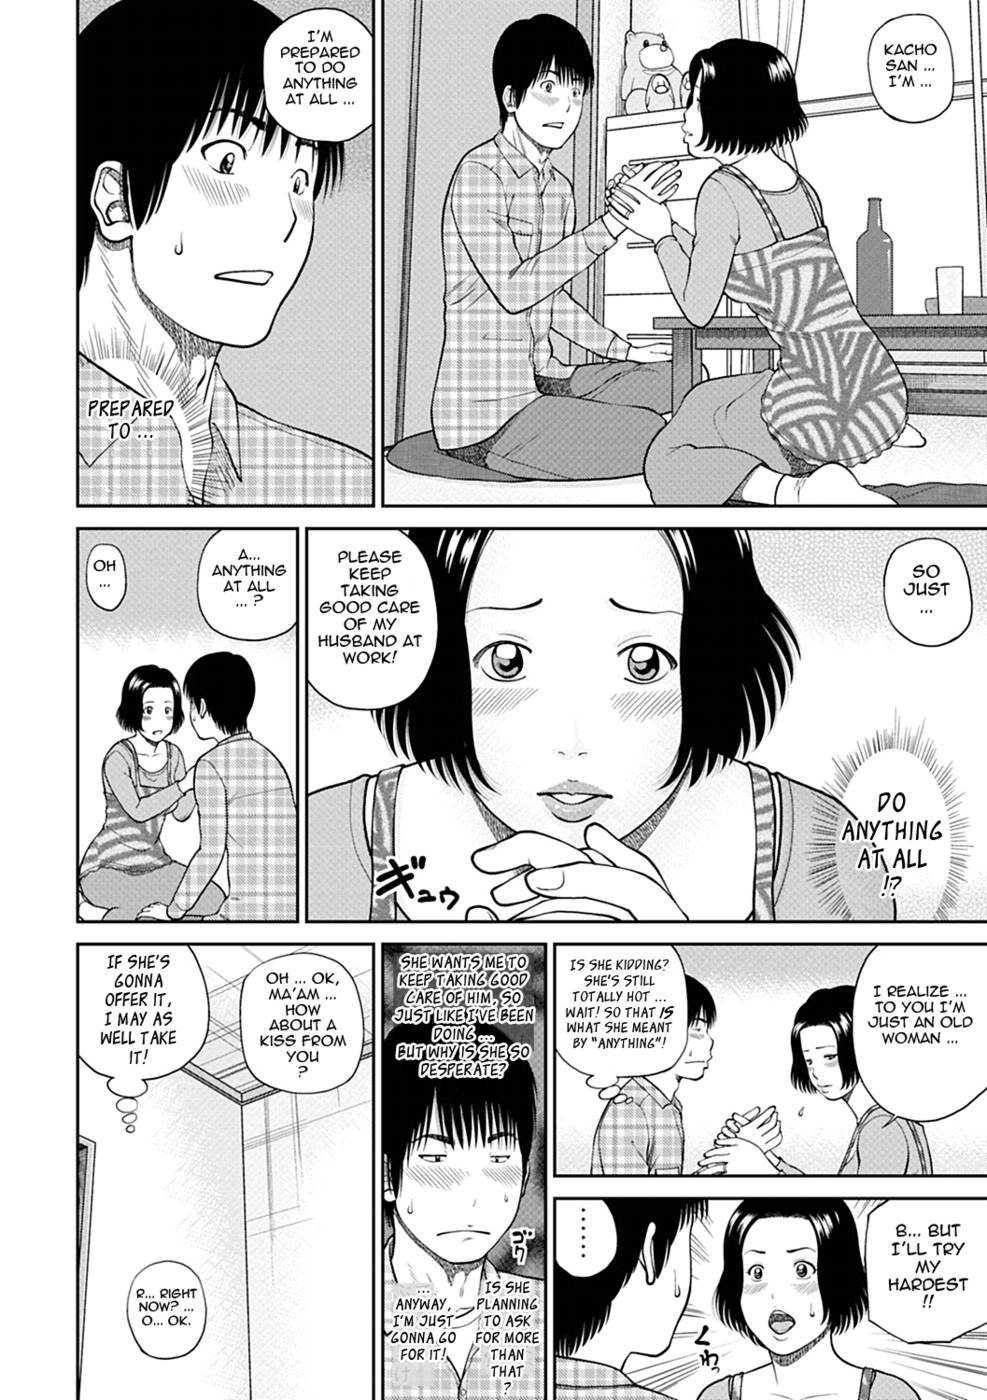 Hentai Manga Comic-34 Year Old Unsatisfied Wife-Chapter 3-Entertaining Wife-First Half-6